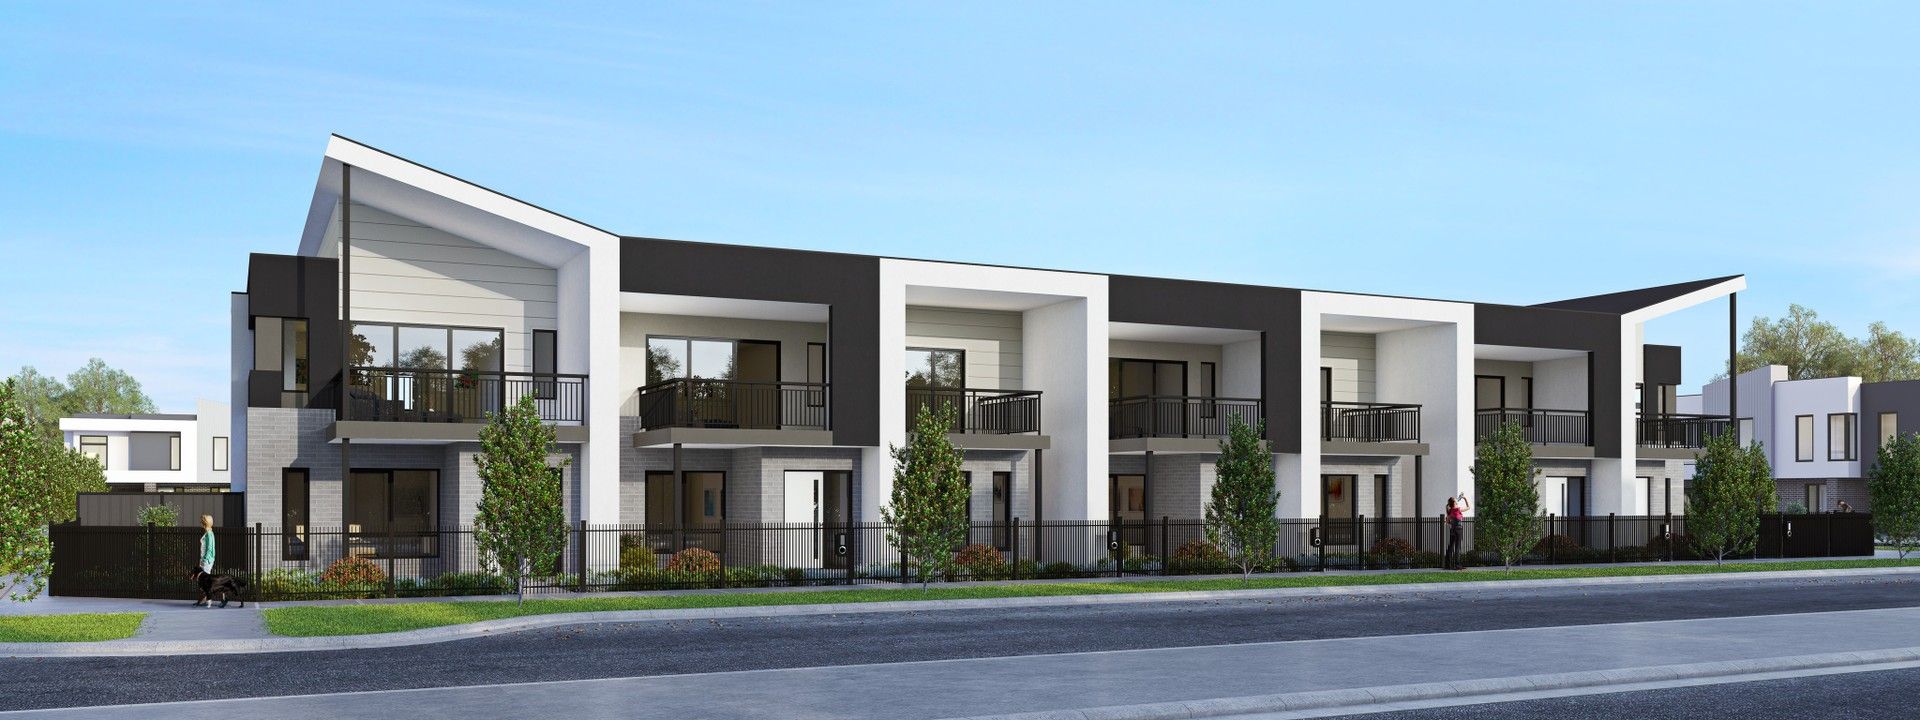 Orbost Mid Townhome by Metricon Homes, Kalkallo VIC 3064, Image 2